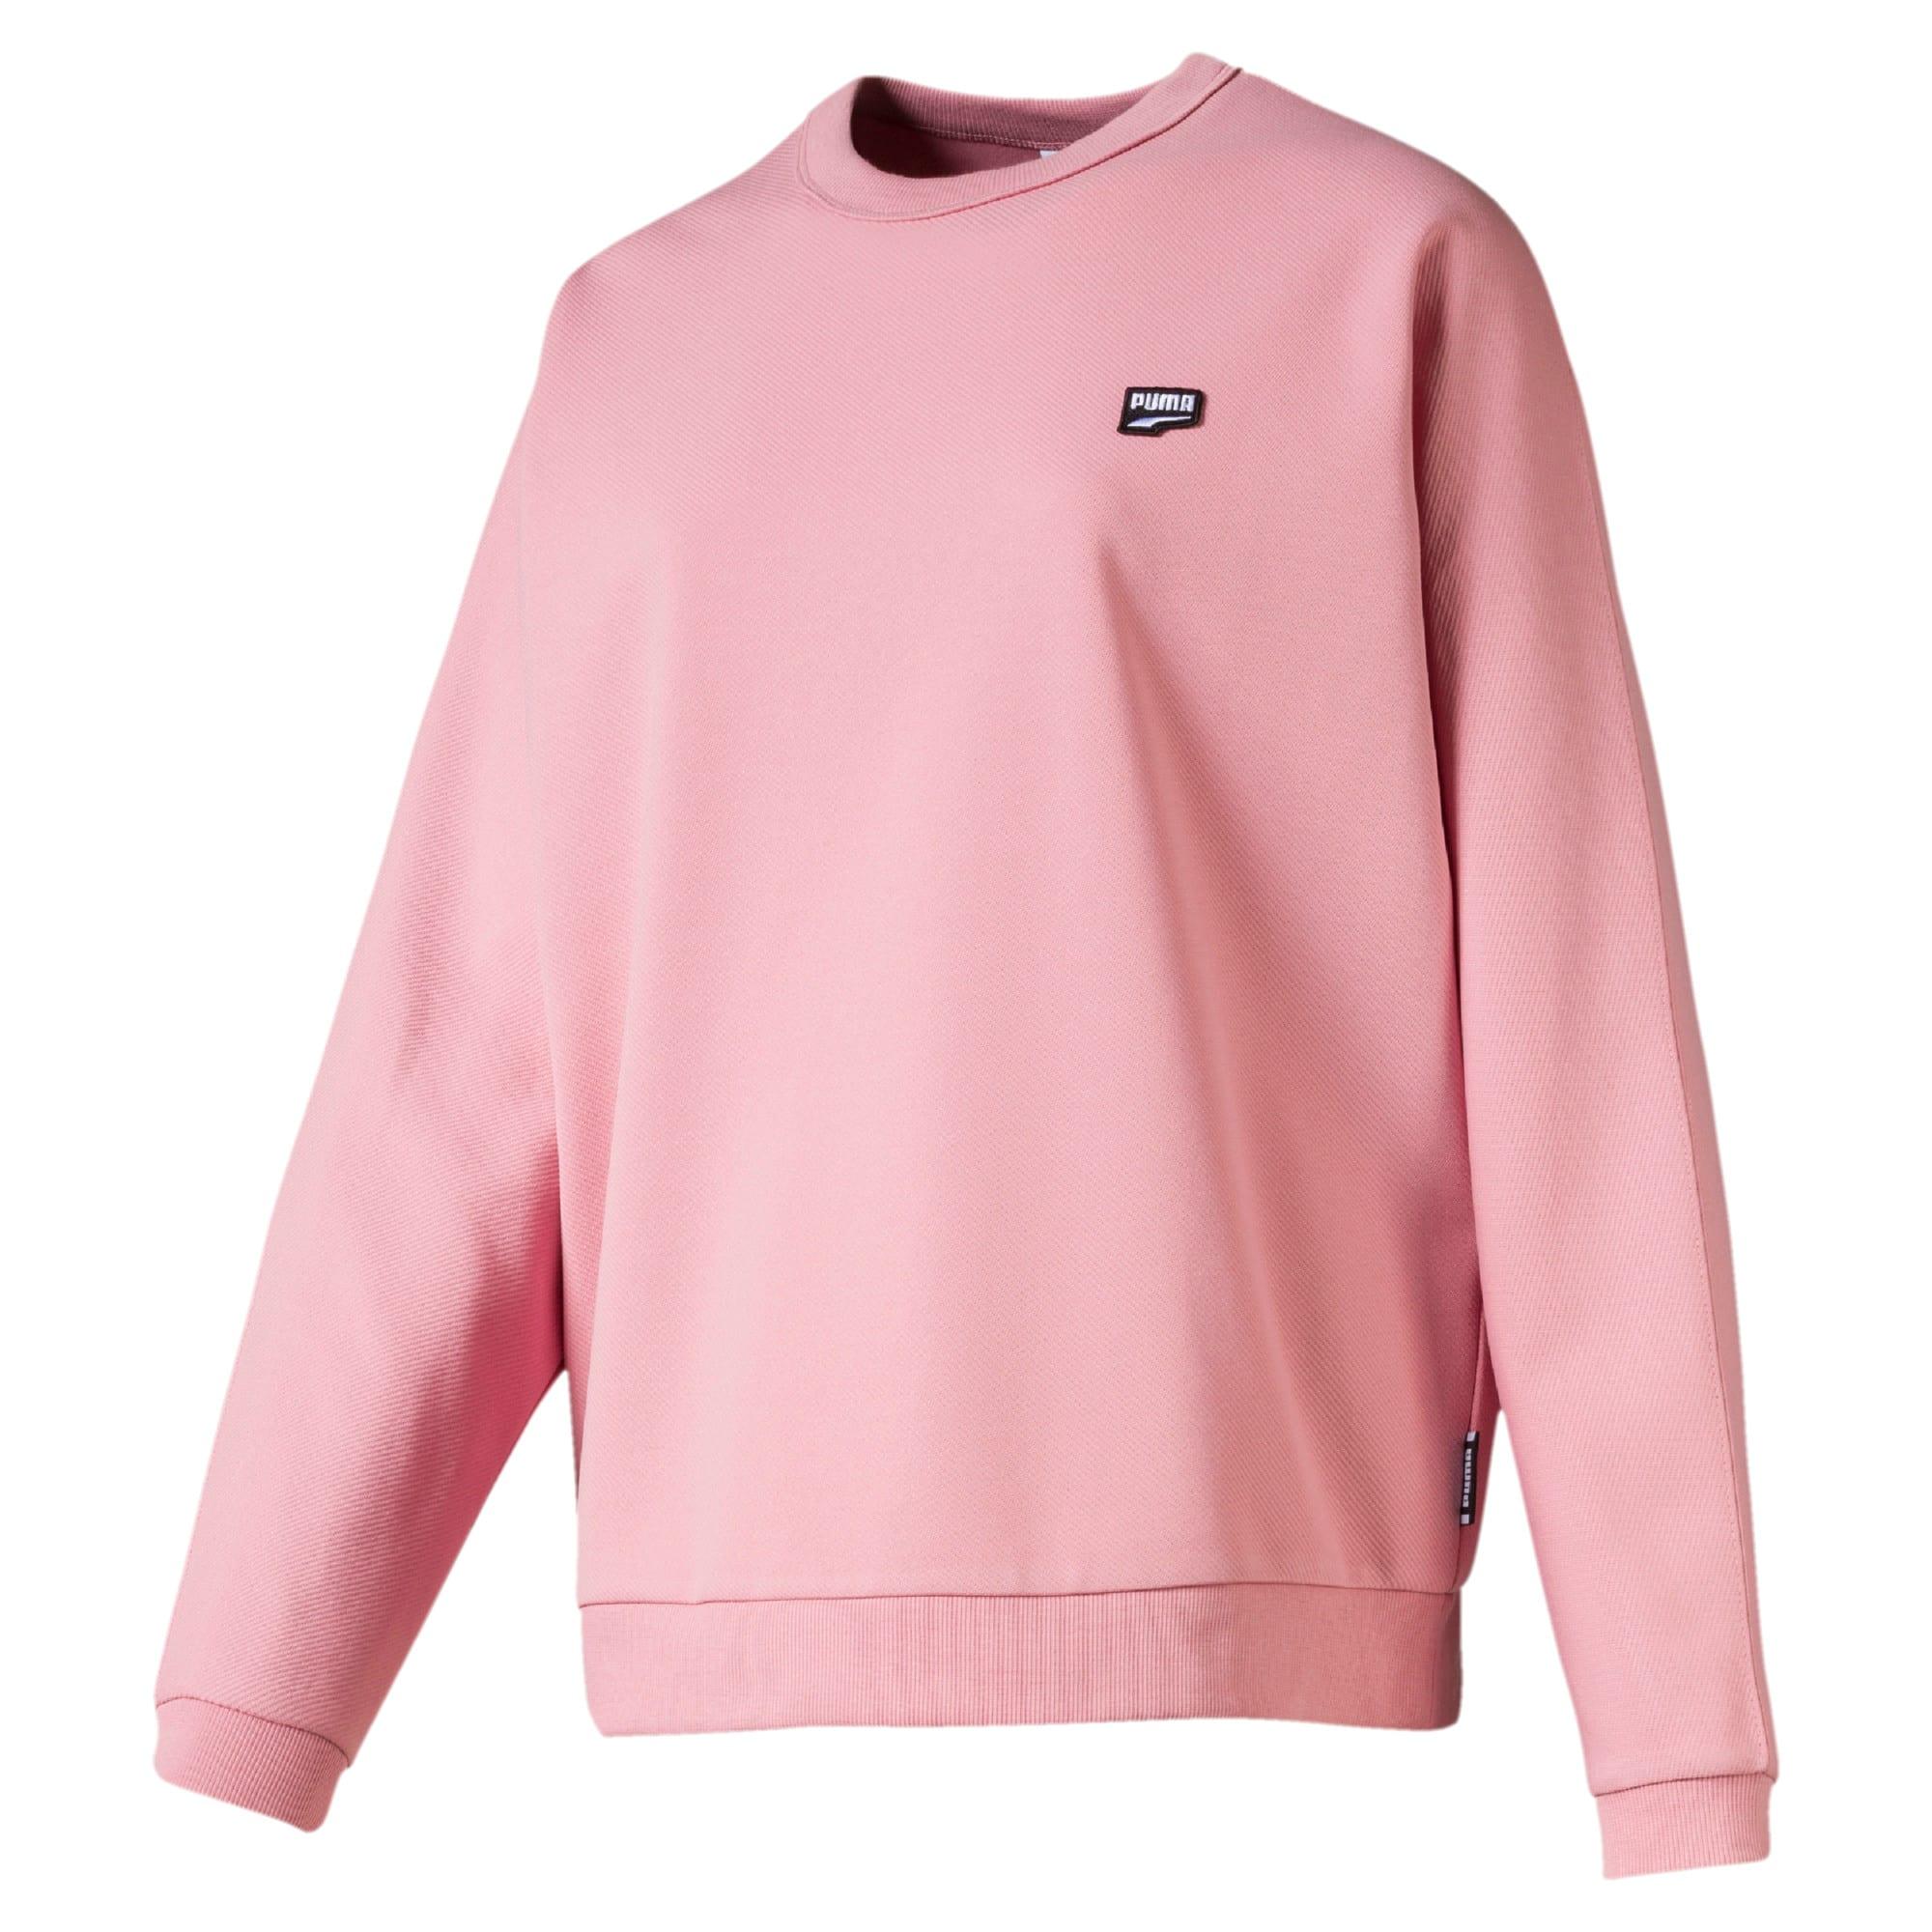 PUMA Synthetic Downtown Women's Crewneck Sweatshirt in 14 (Pink) - Save ...